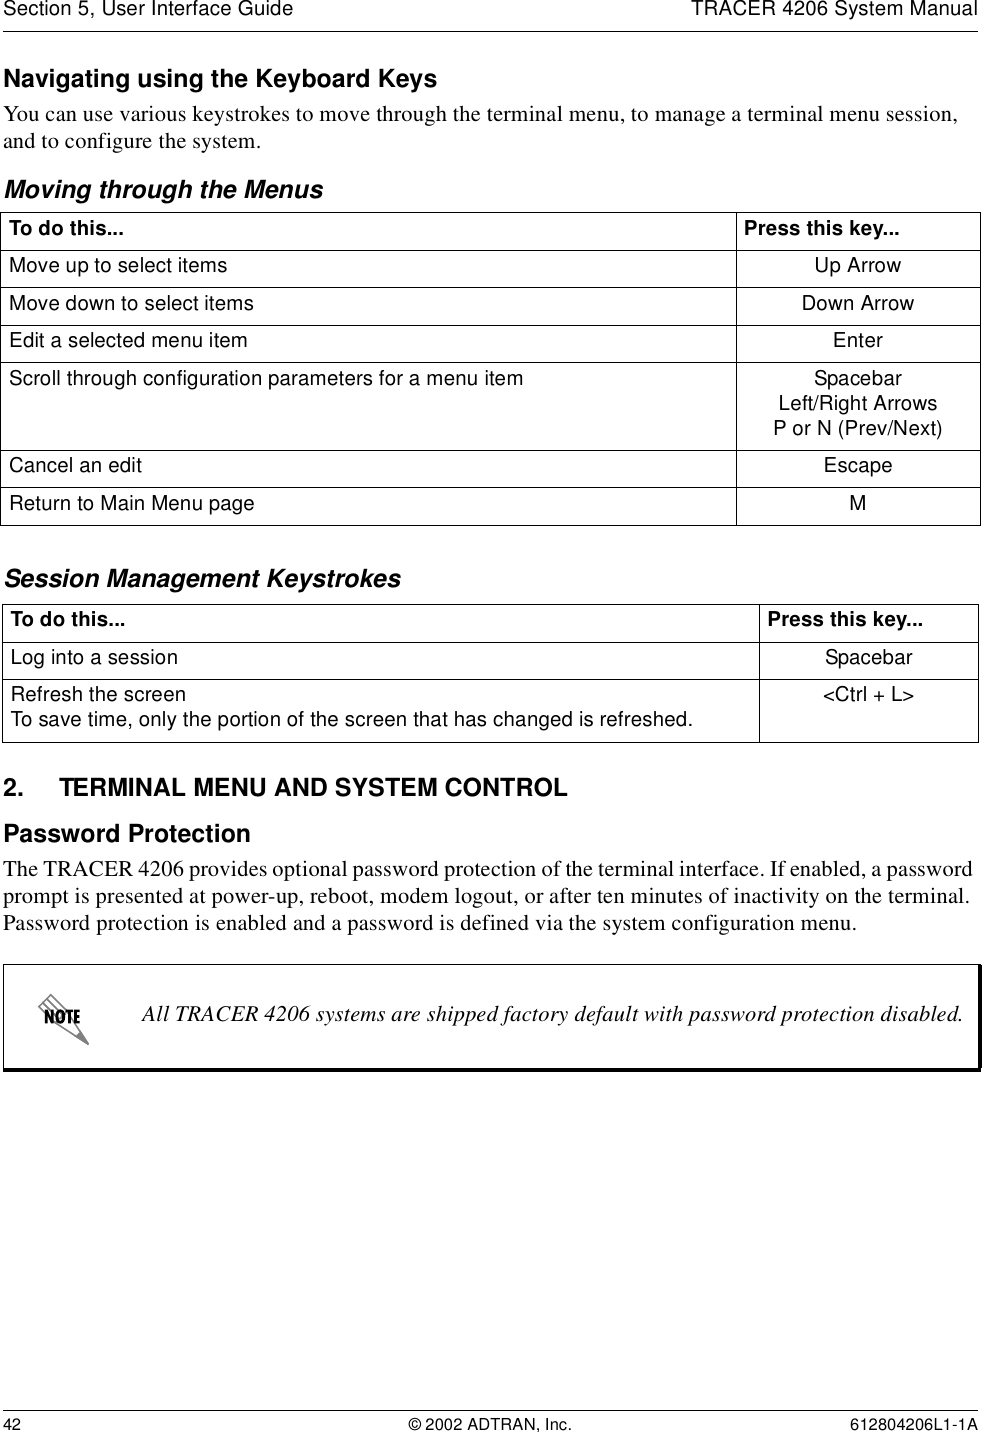 Section 5, User Interface Guide TRACER 4206 System Manual42 © 2002 ADTRAN, Inc. 612804206L1-1ANavigating using the Keyboard KeysYou can use various keystrokes to move through the terminal menu, to manage a terminal menu session, and to configure the system.Moving through the MenusSession Management Keystrokes2. TERMINAL MENU AND SYSTEM CONTROLPassword ProtectionThe TRACER 4206 provides optional password protection of the terminal interface. If enabled, a password prompt is presented at power-up, reboot, modem logout, or after ten minutes of inactivity on the terminal. Password protection is enabled and a password is defined via the system configuration menu.To do this... Press this key...Move up to select items Up ArrowMove down to select items Down ArrowEdit a selected menu item EnterScroll through configuration parameters for a menu item SpacebarLeft/Right ArrowsP or N (Prev/Next)Cancel an edit EscapeReturn to Main Menu page MTo do this... Press this key...Log into a session SpacebarRefresh the screenTo save time, only the portion of the screen that has changed is refreshed.  &lt;Ctrl + L&gt;All TRACER 4206 systems are shipped factory default with password protection disabled.